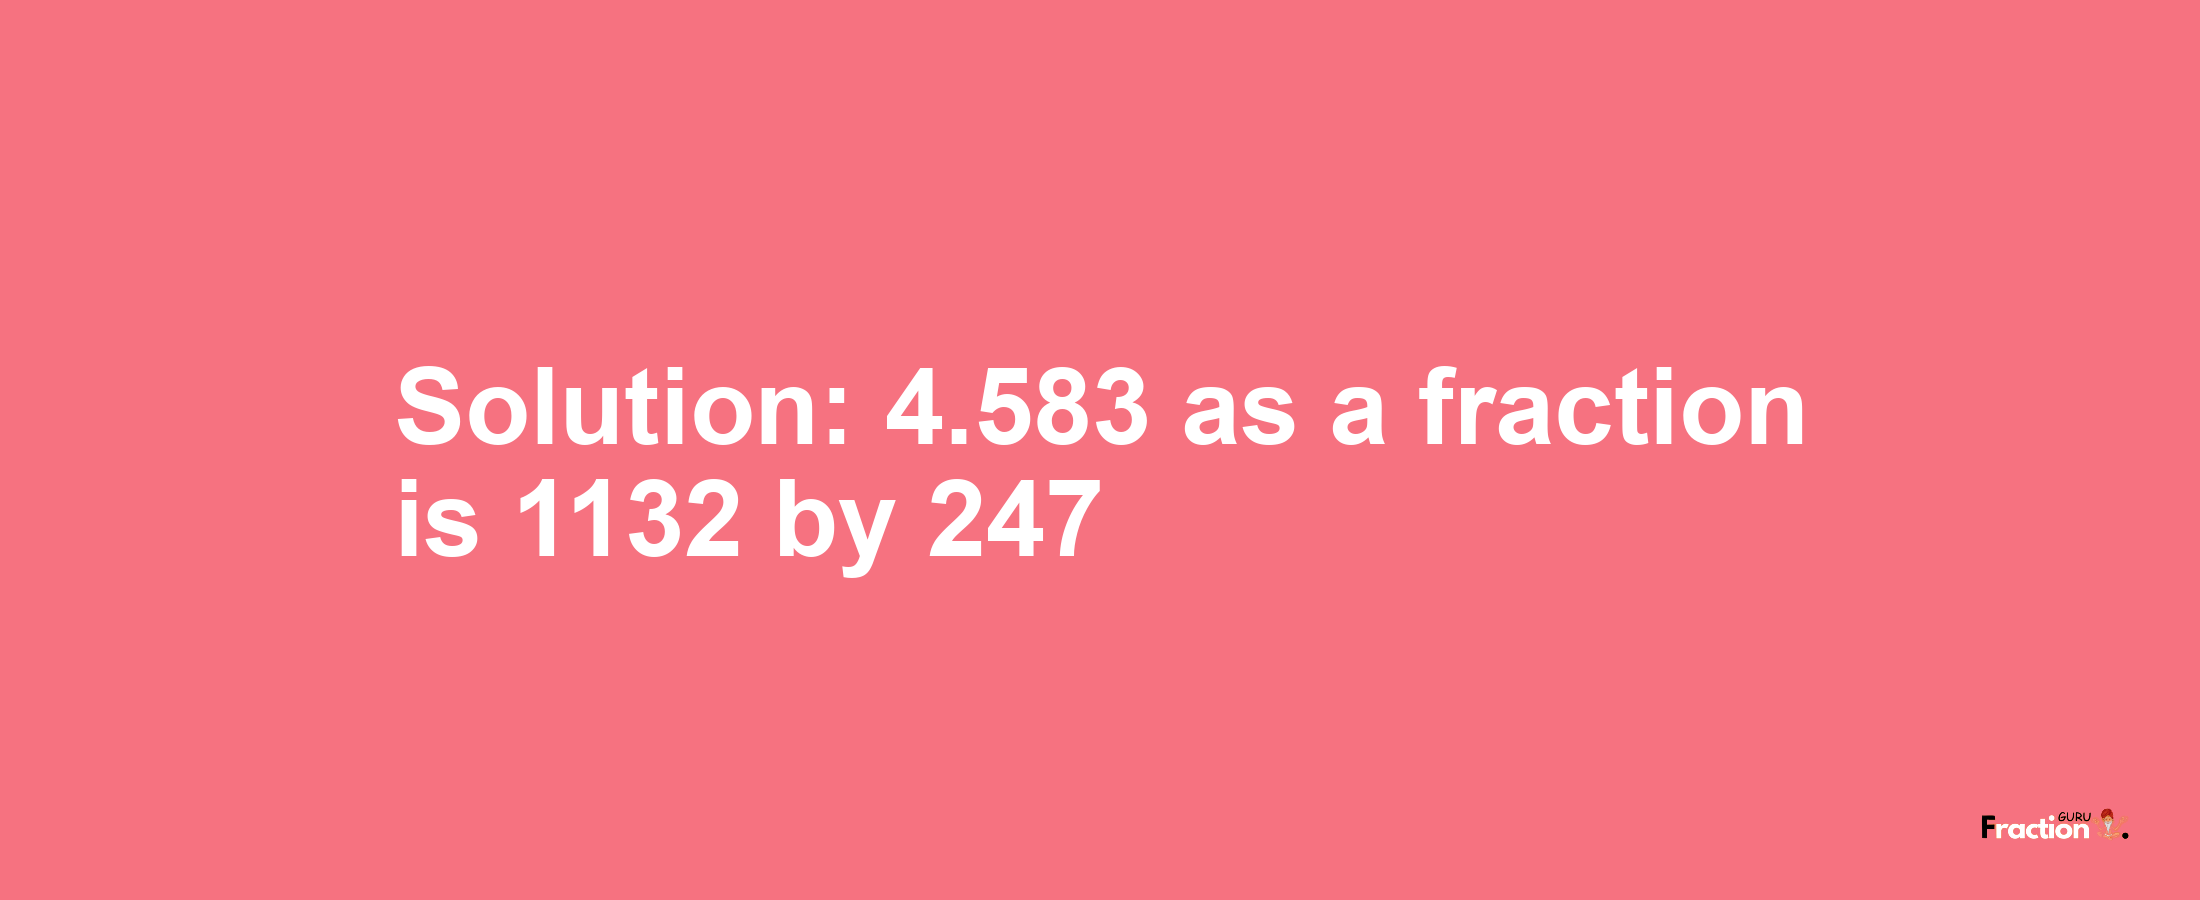 Solution:4.583 as a fraction is 1132/247